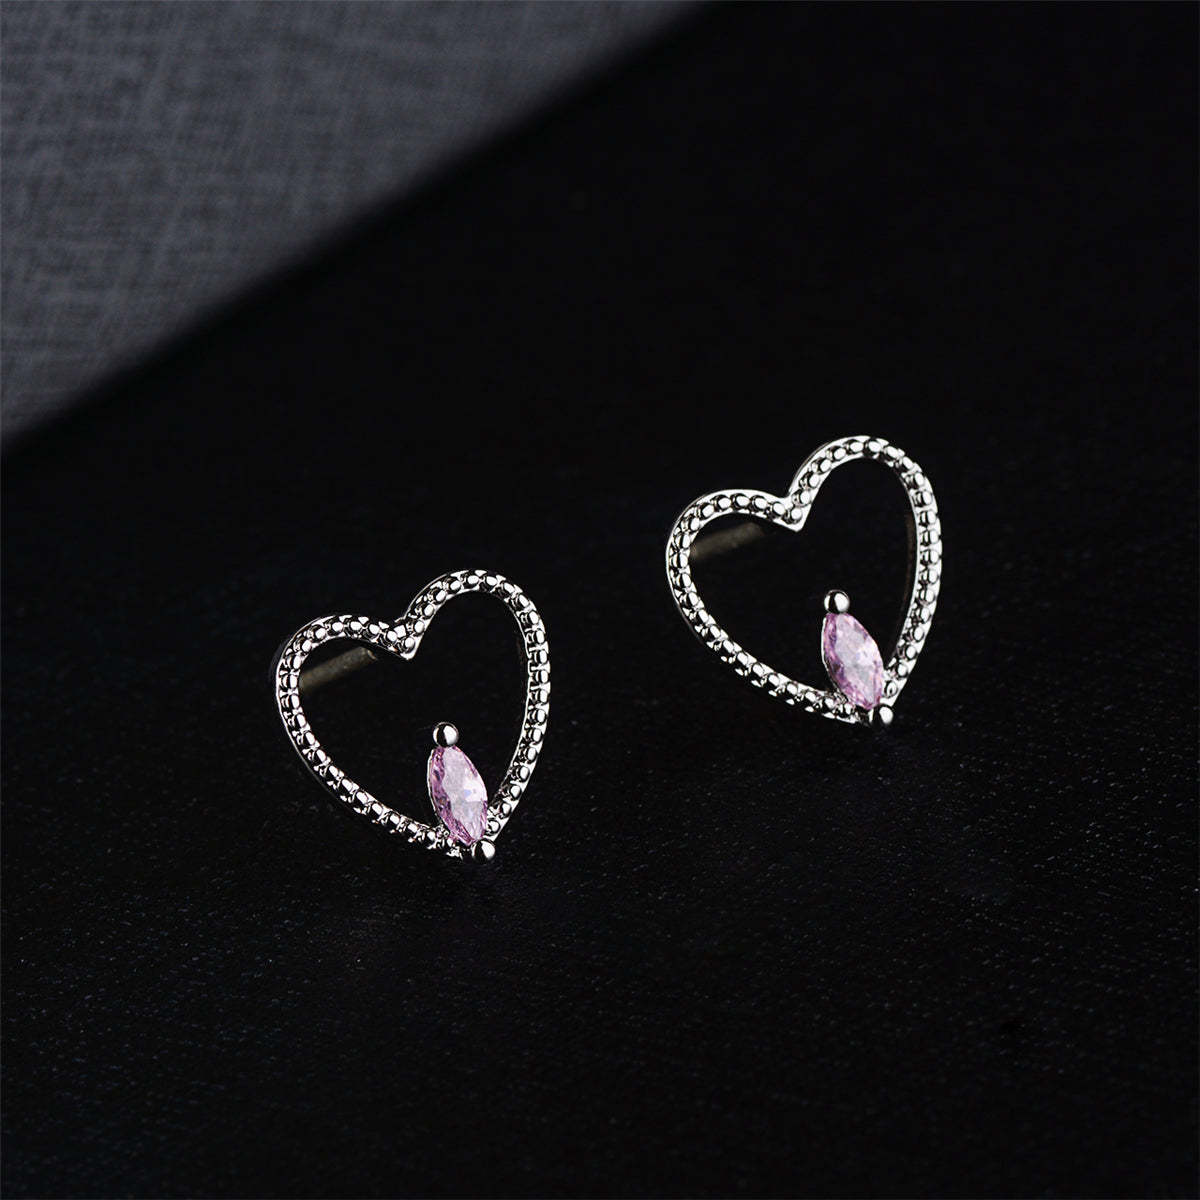 Primary image for Crystal & Silver-Plated Pear-Cut Heart Stud Earrings